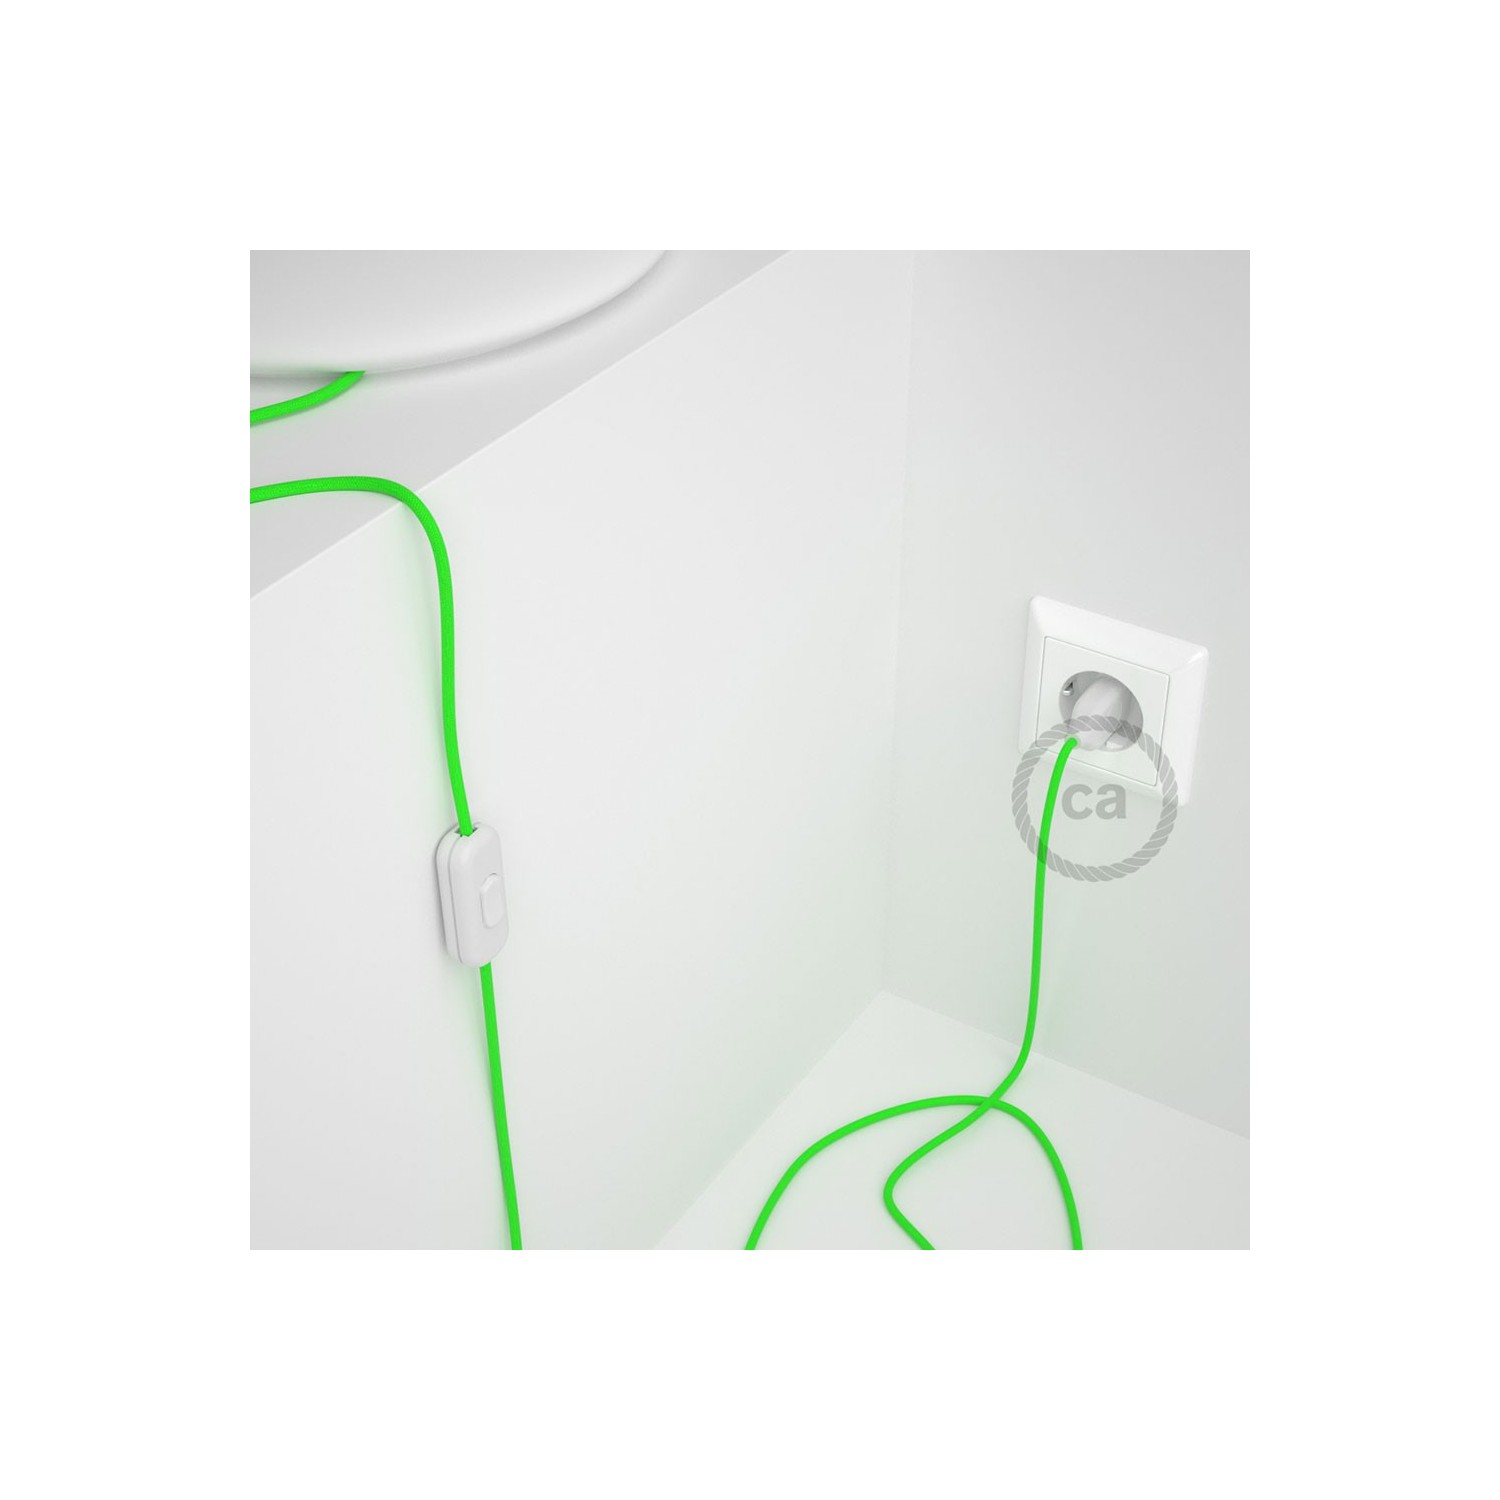 Lamp wiring, RF06 Neon Green Rayon 1,80 m. Choose the colour of the switch and plug.